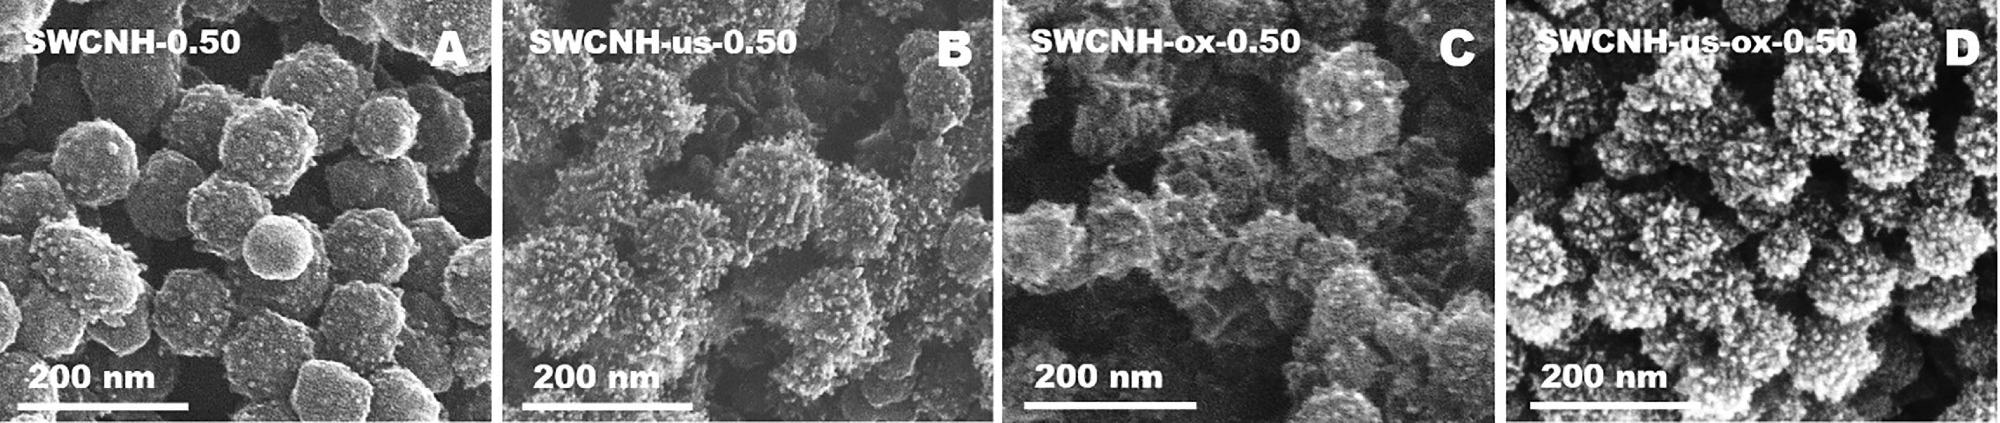 HR-SEM – the structure of pristine SWCNH (A); treated with ultrasounds (SWCNH-us) (B), oxidated SWCNH (SWCNH-ox) (C), and treated with both ultrasounds and oxidized (SWCNH-us-ox) (D).